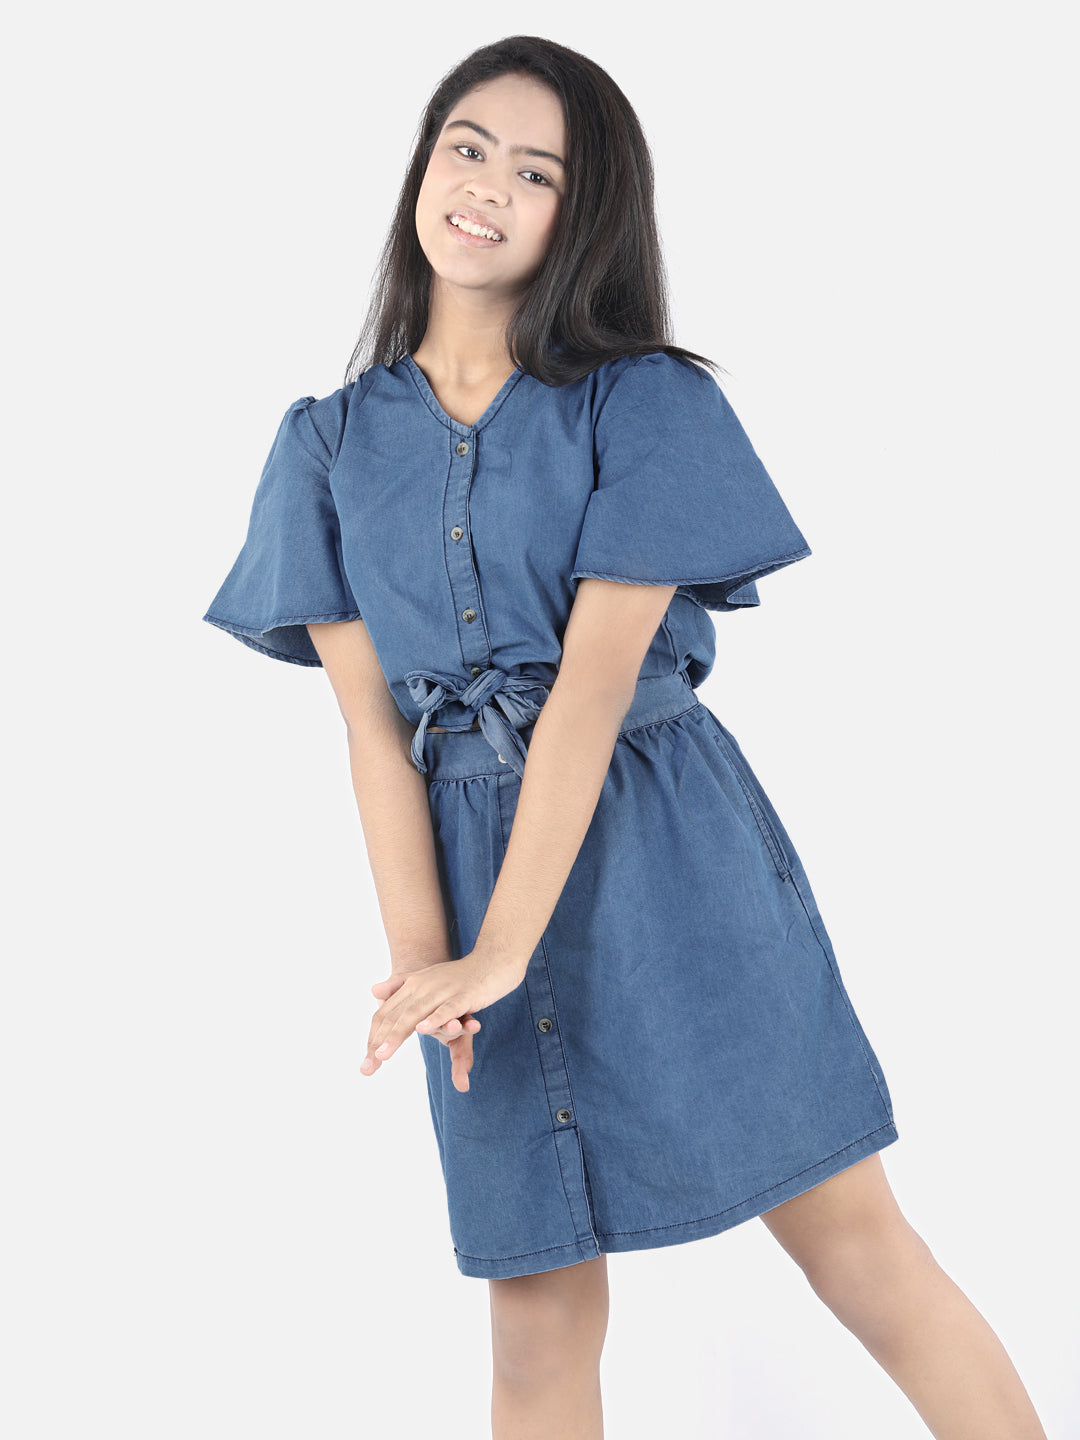 Girls Denim Dress with attached Tie knot style top